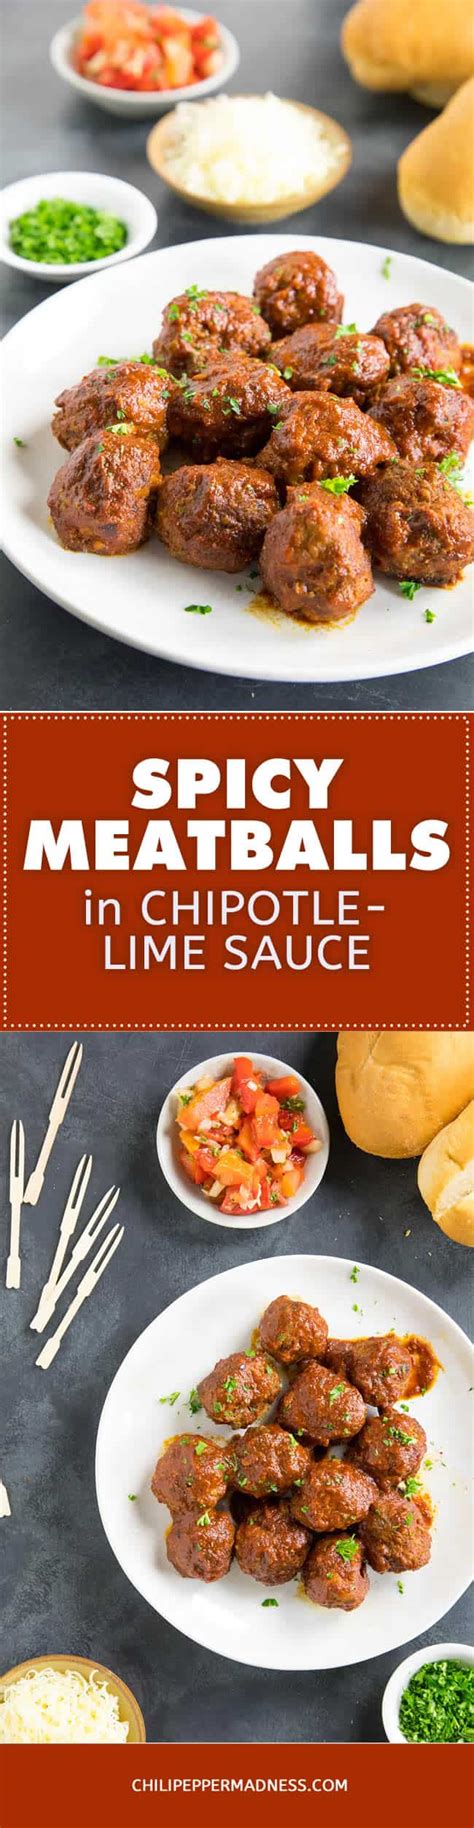 spicy-meatballs-in-chipotle-lime-sauce-chili-pepper image